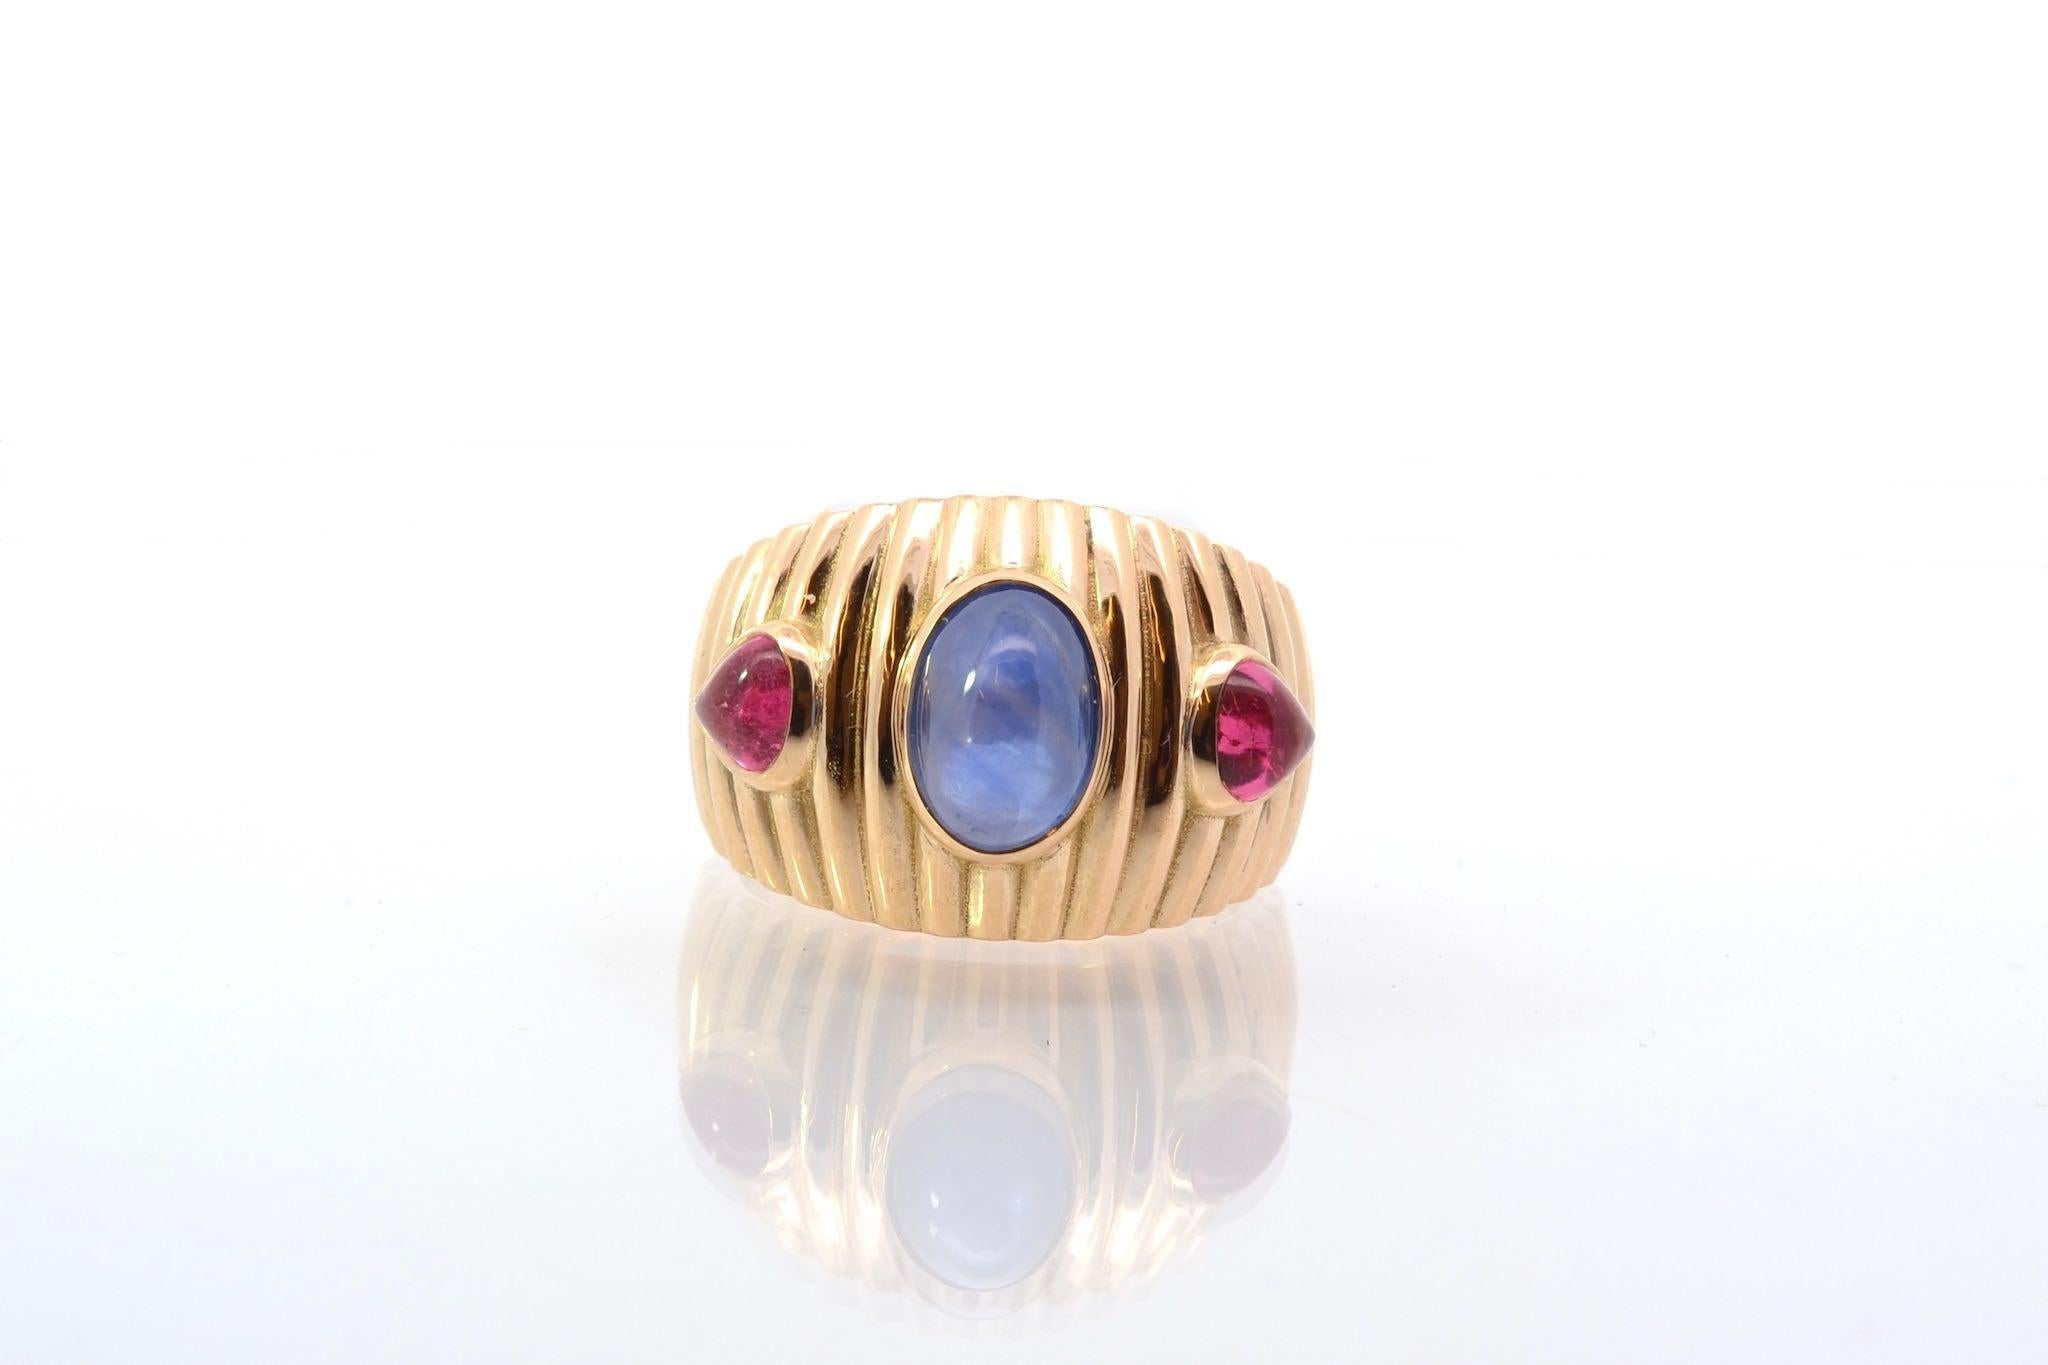 Stones: Cabochon sapphire: 3.12 cts and 2 cabochon tourmalines: 1 ct
Material: 18k gold
Weight: 12.4g
Period: Recent vintage style
Size: 51 (free sizing)
Certificate
Ref. :25633